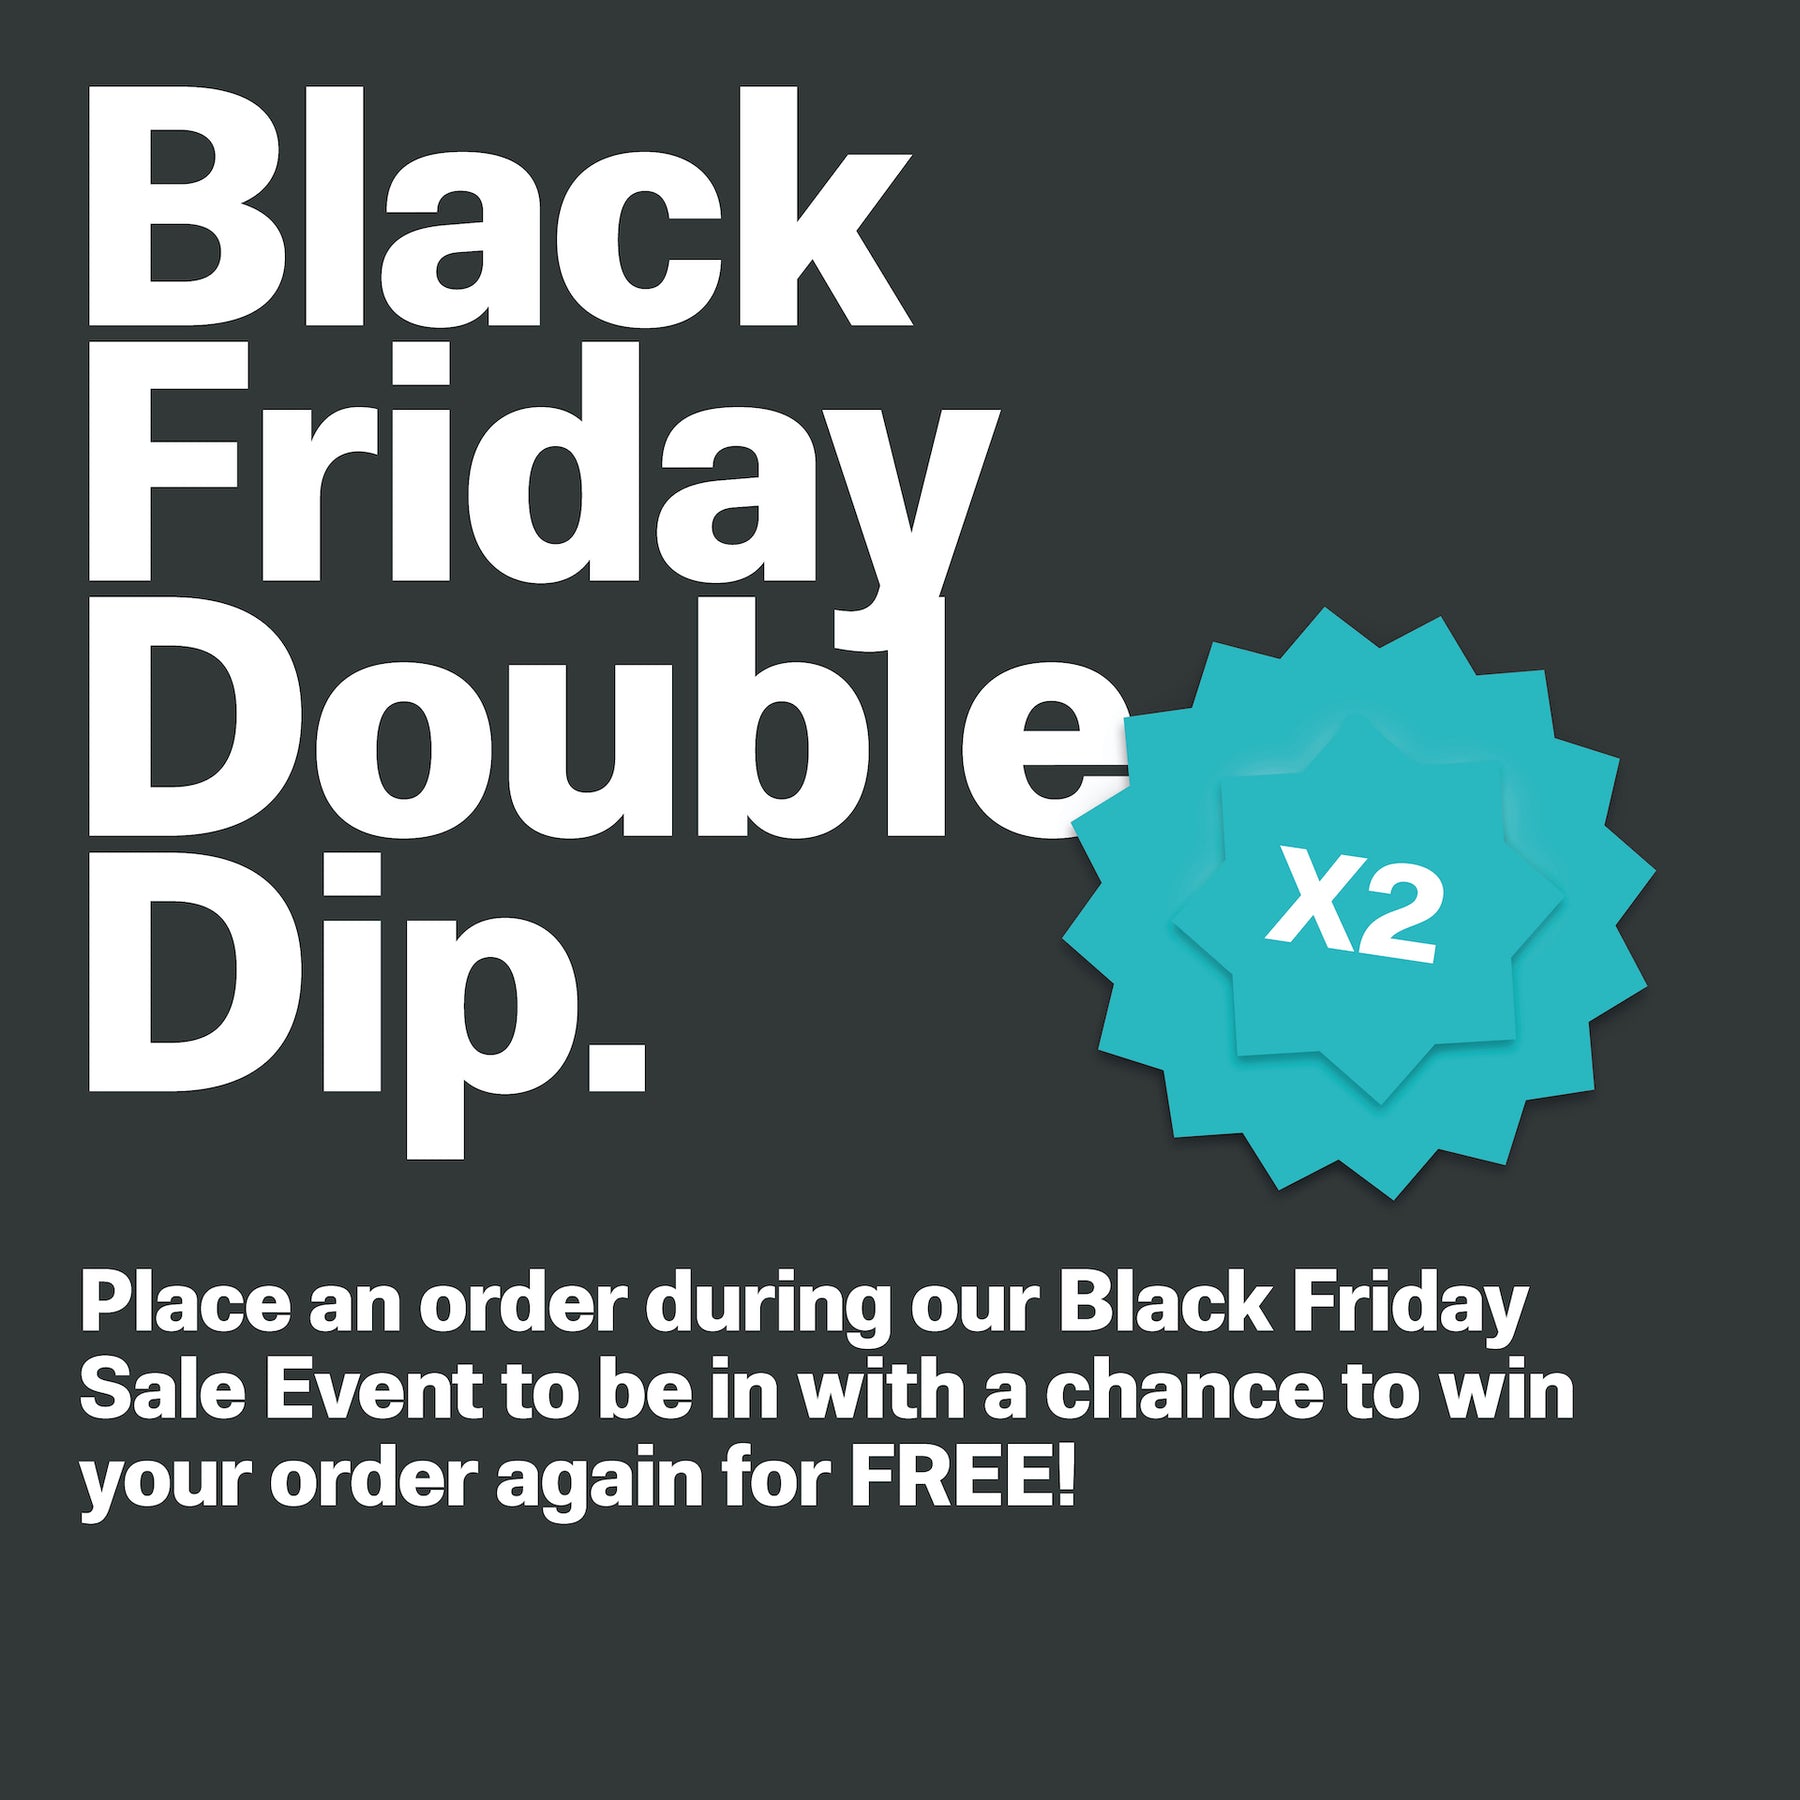 Black Friday Double Dip.